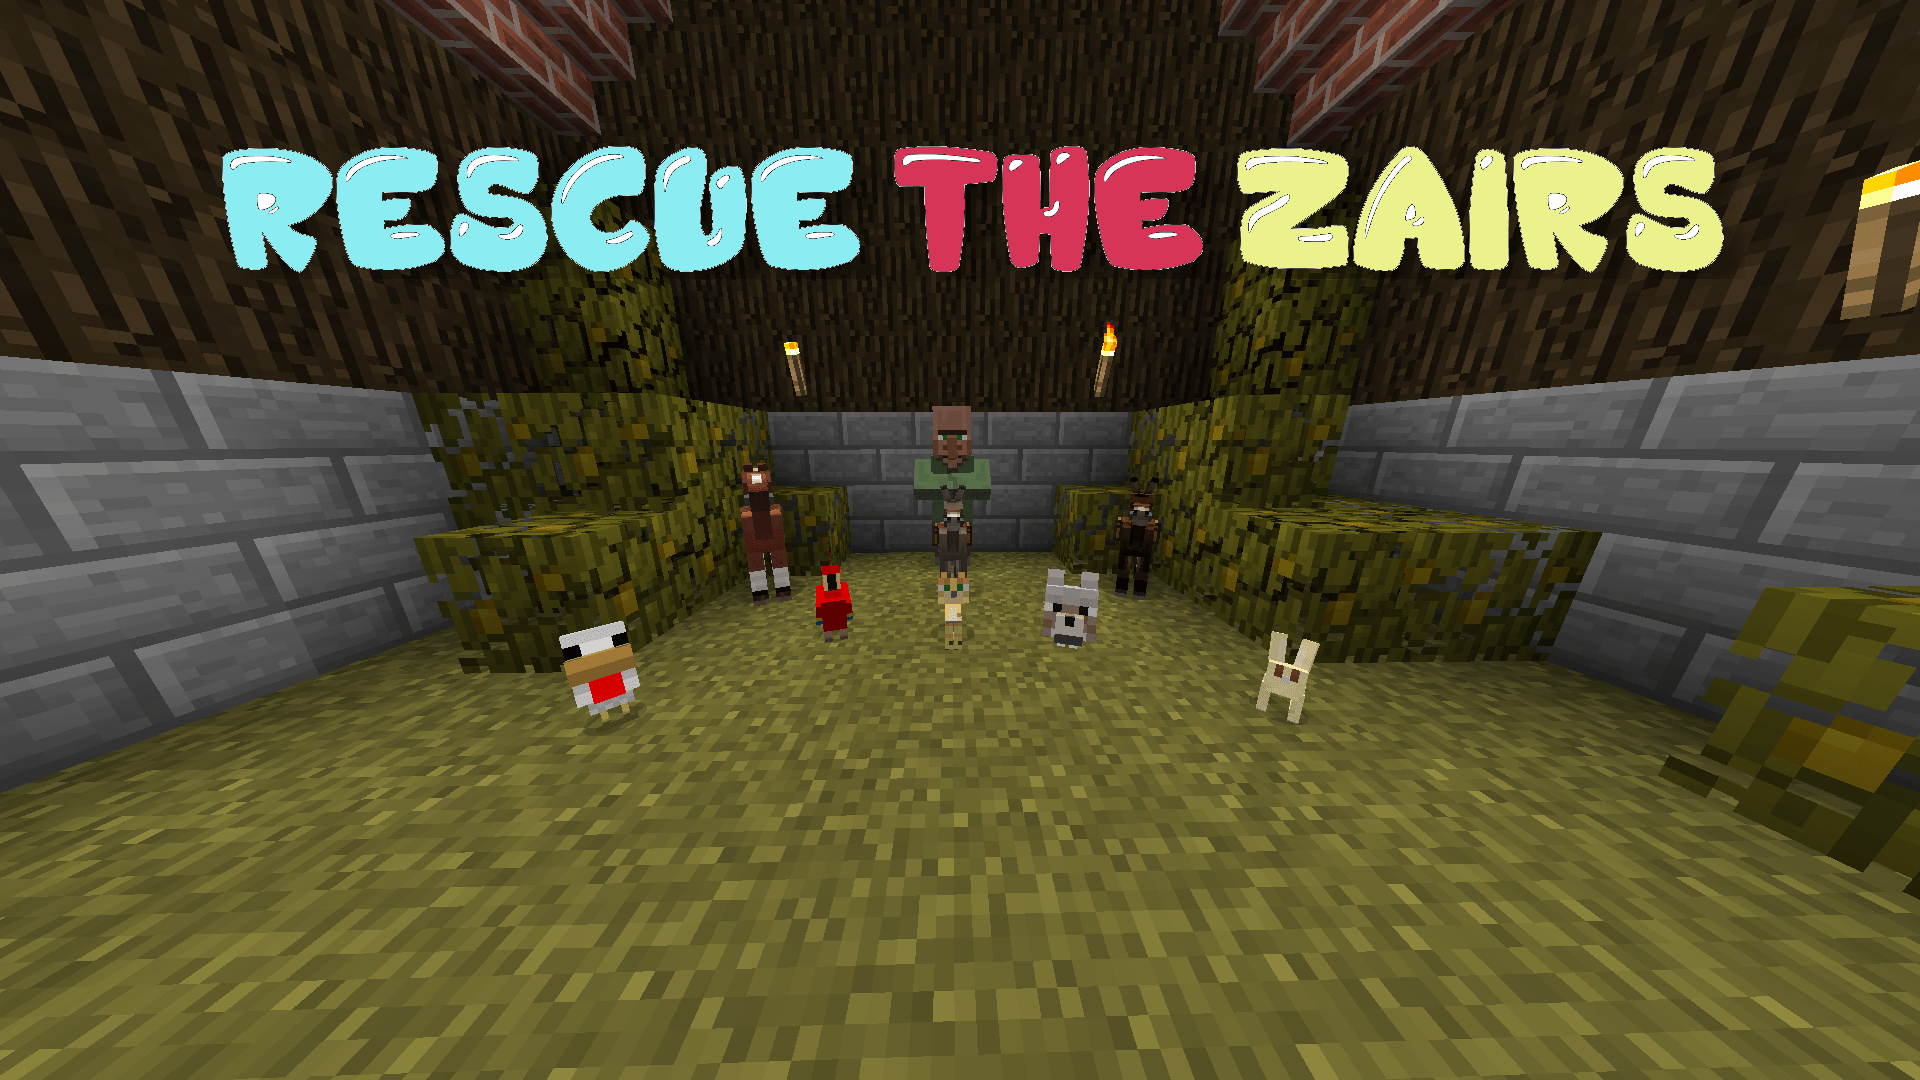 Download Rescue The Zairs for Minecraft 1.13.2